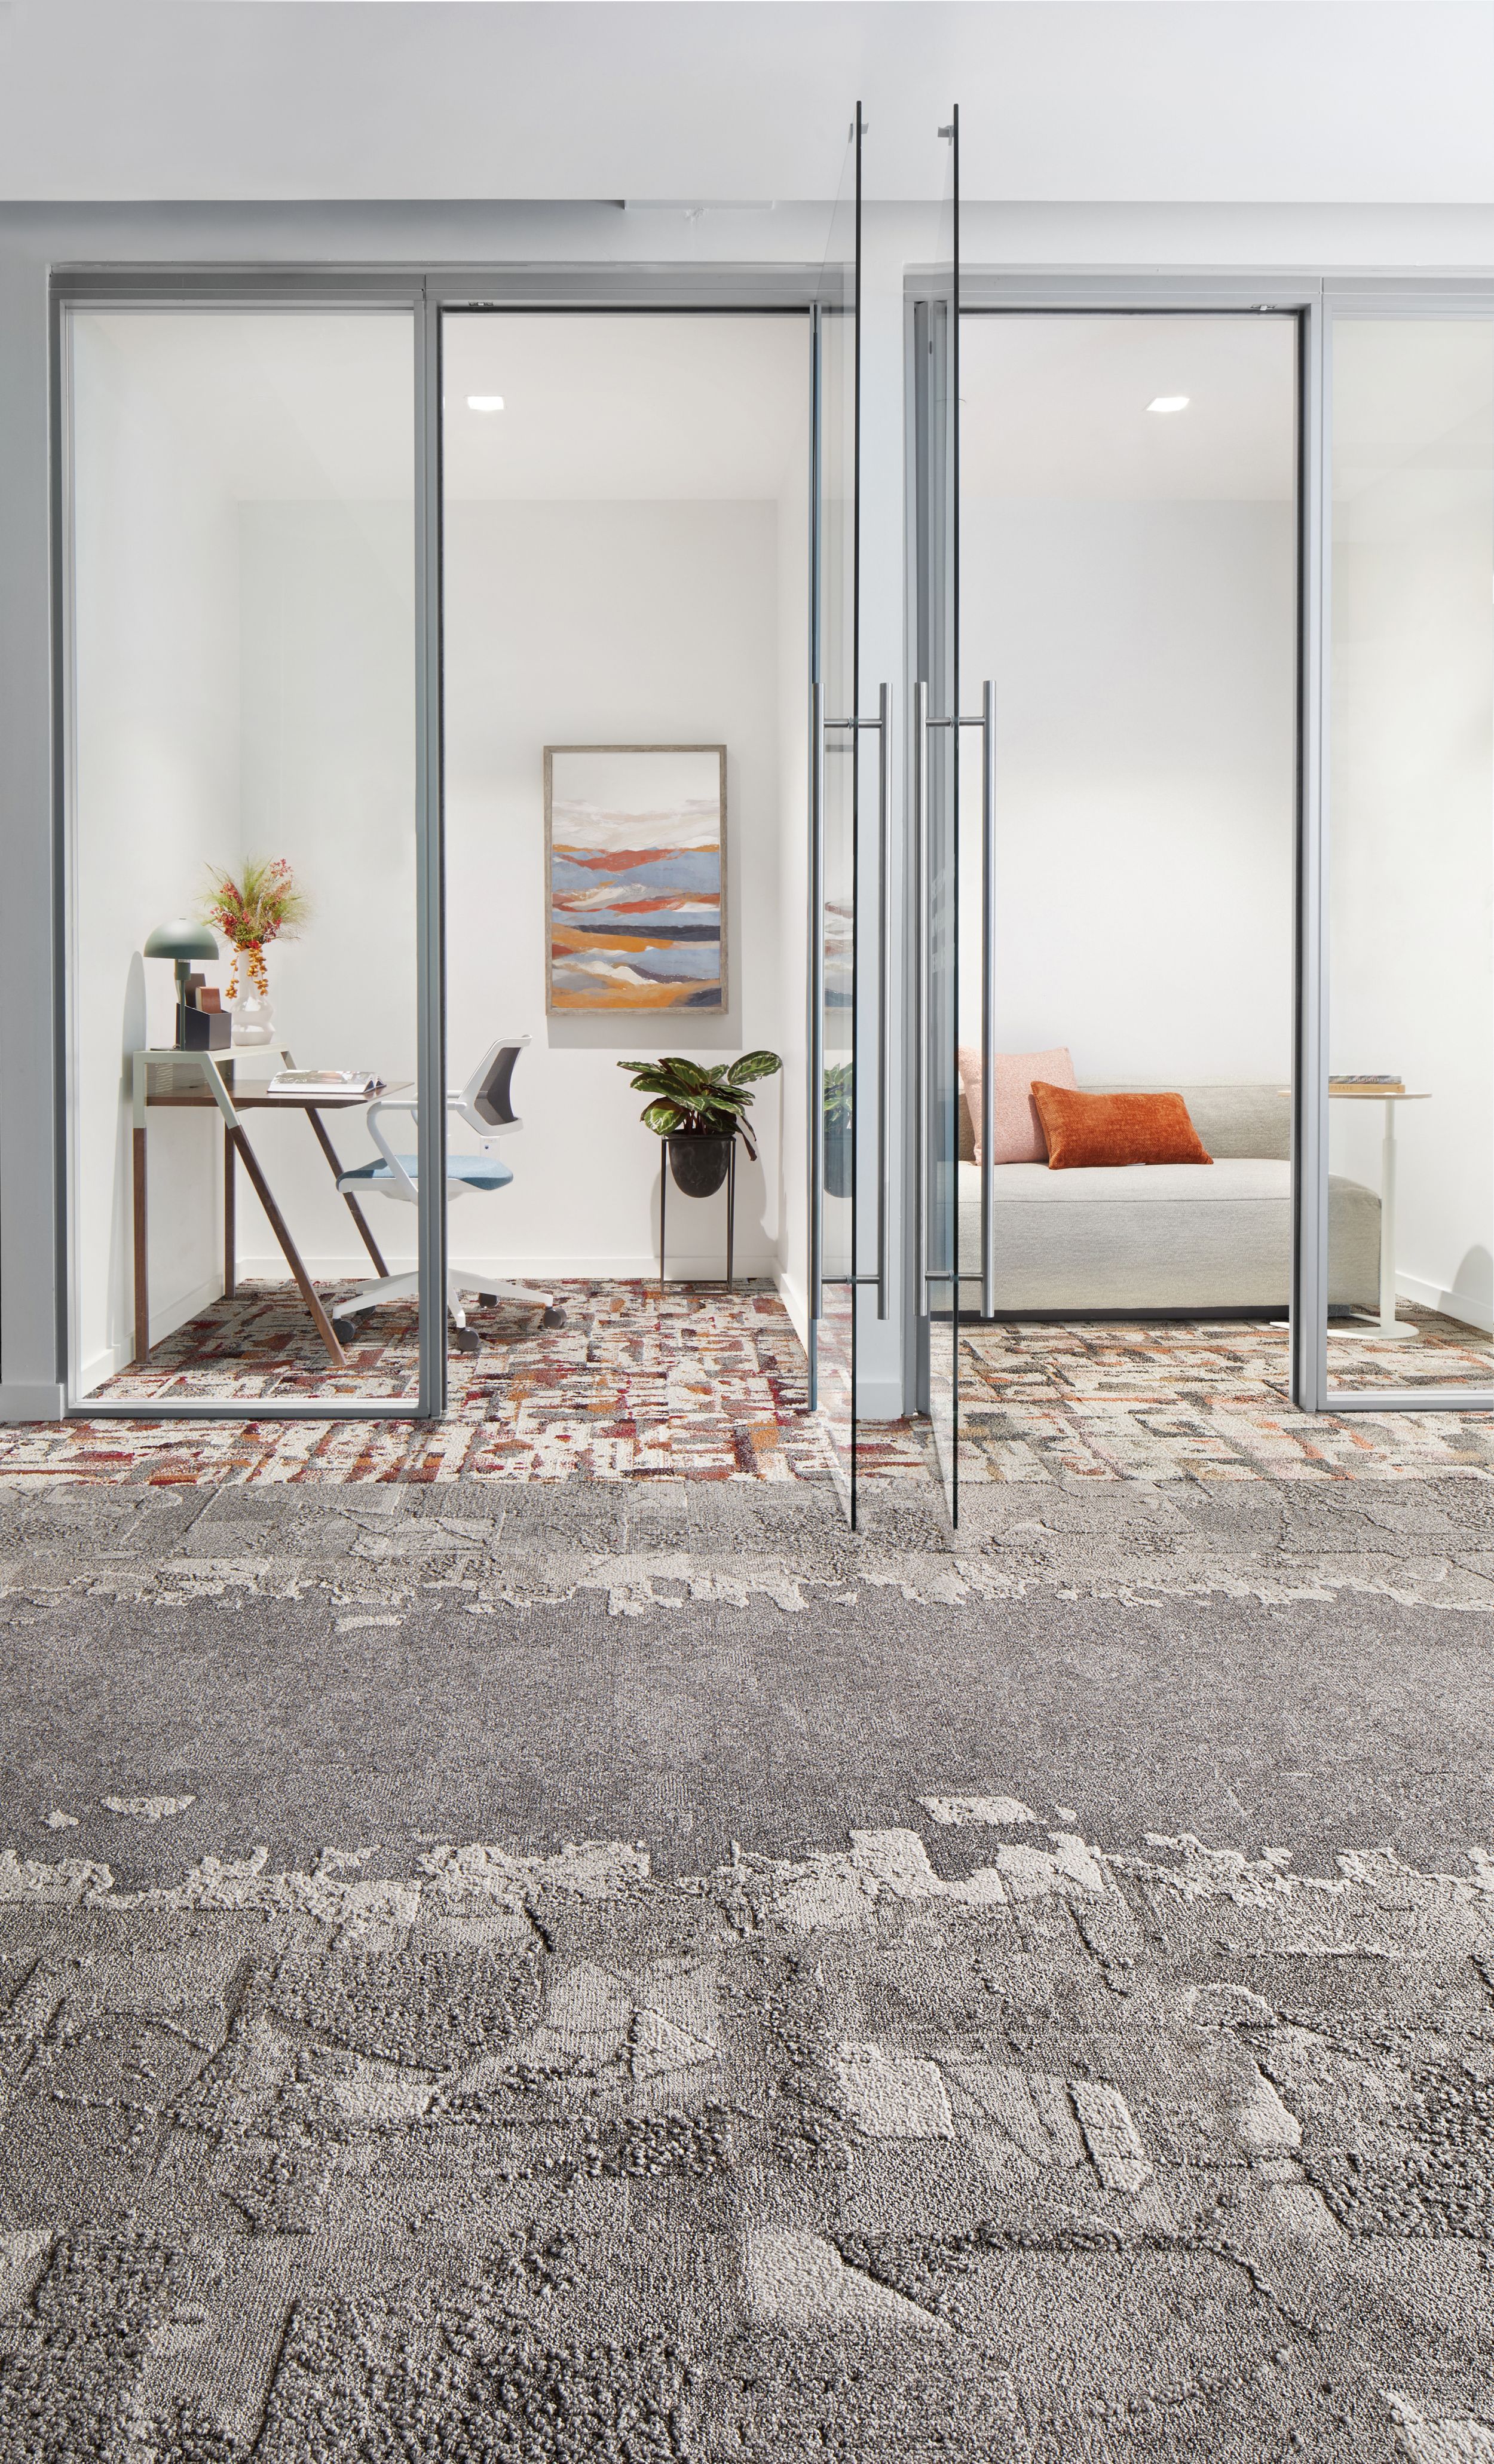 Interface Mountain Rock, Bridge Creek, Flat Rock, and Panola Mountain carpet tile in entryway to two small divided rooms with a couch and a desk numéro d’image 8